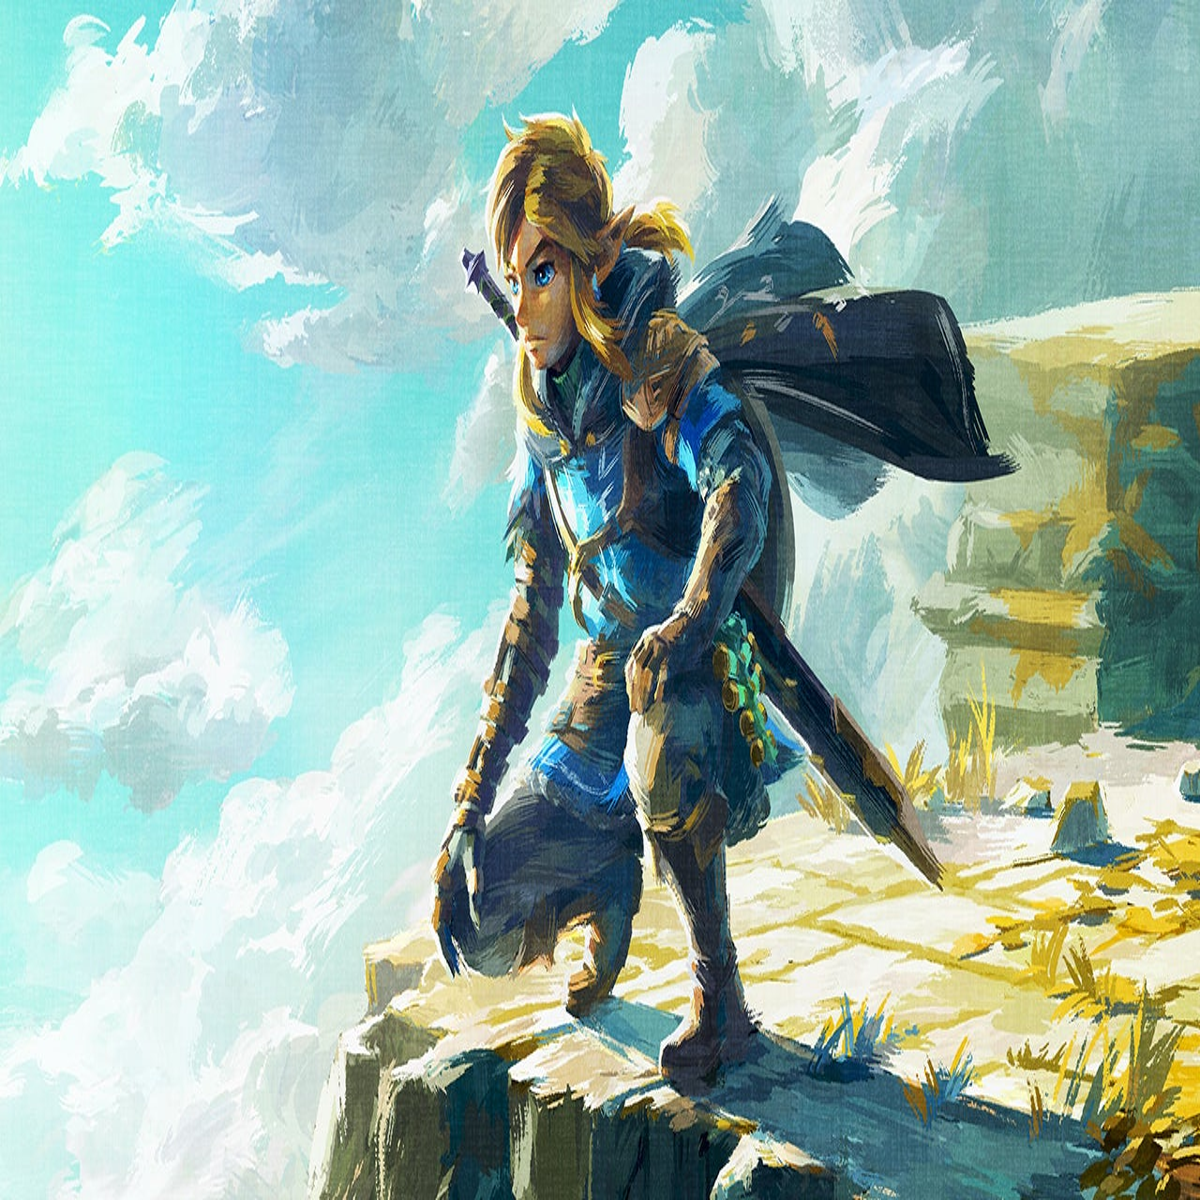 We only need to know one thing after the final Tears of the Kingdom trailer  - can we play as Zelda?